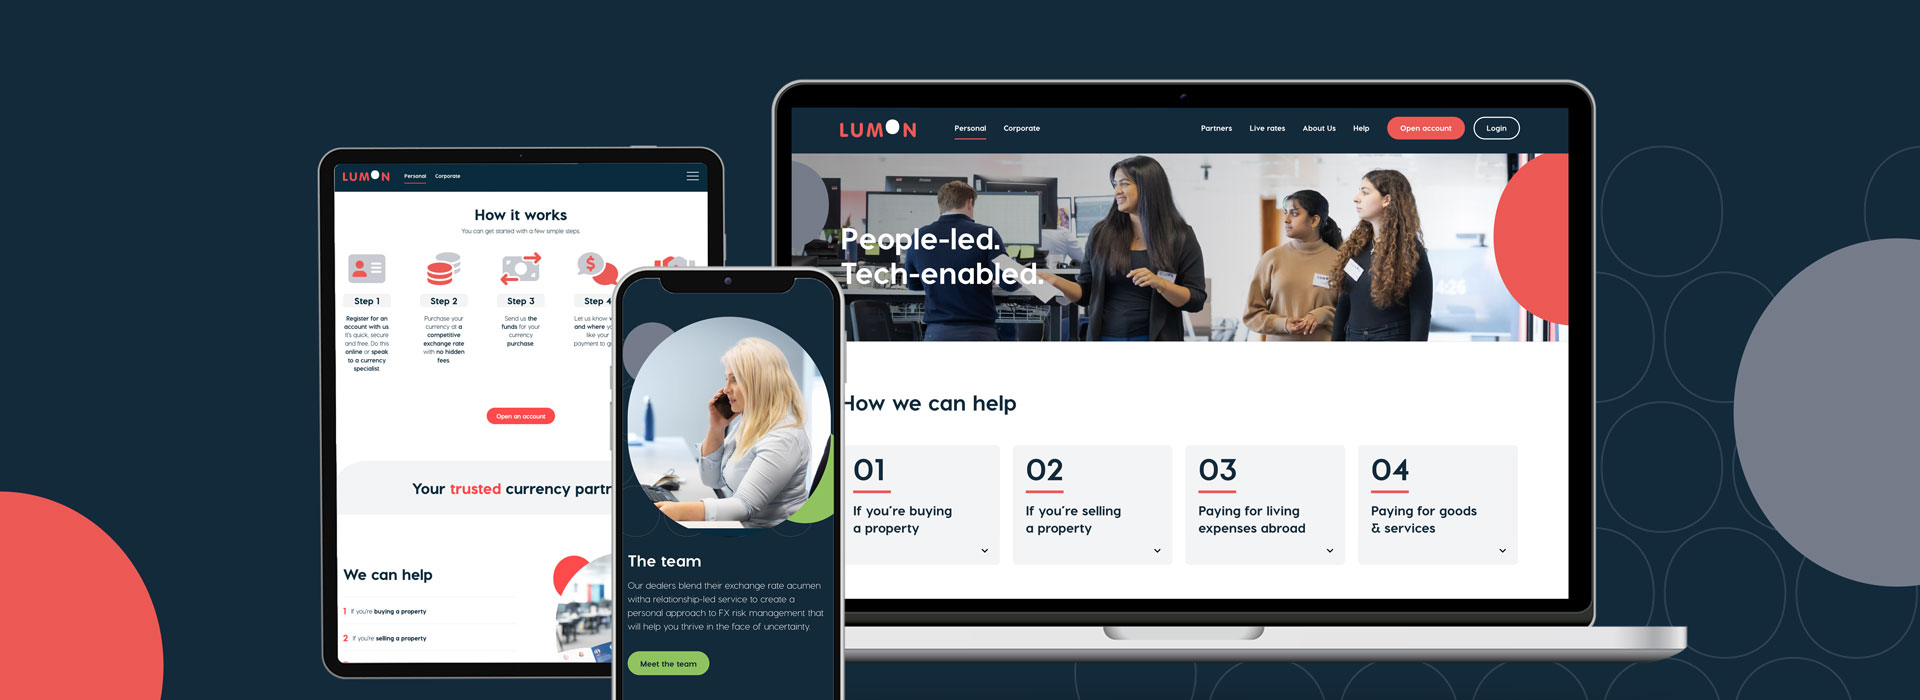 Responsive website design displayed on multiple devices featuring 'Lumon' currency exchange platform with a headline 'People-led. Tech-enabled.' Steps on how to get started, services offered for buying and selling property, and living expenses abroad, with images of a diverse team in a collaborative office environment